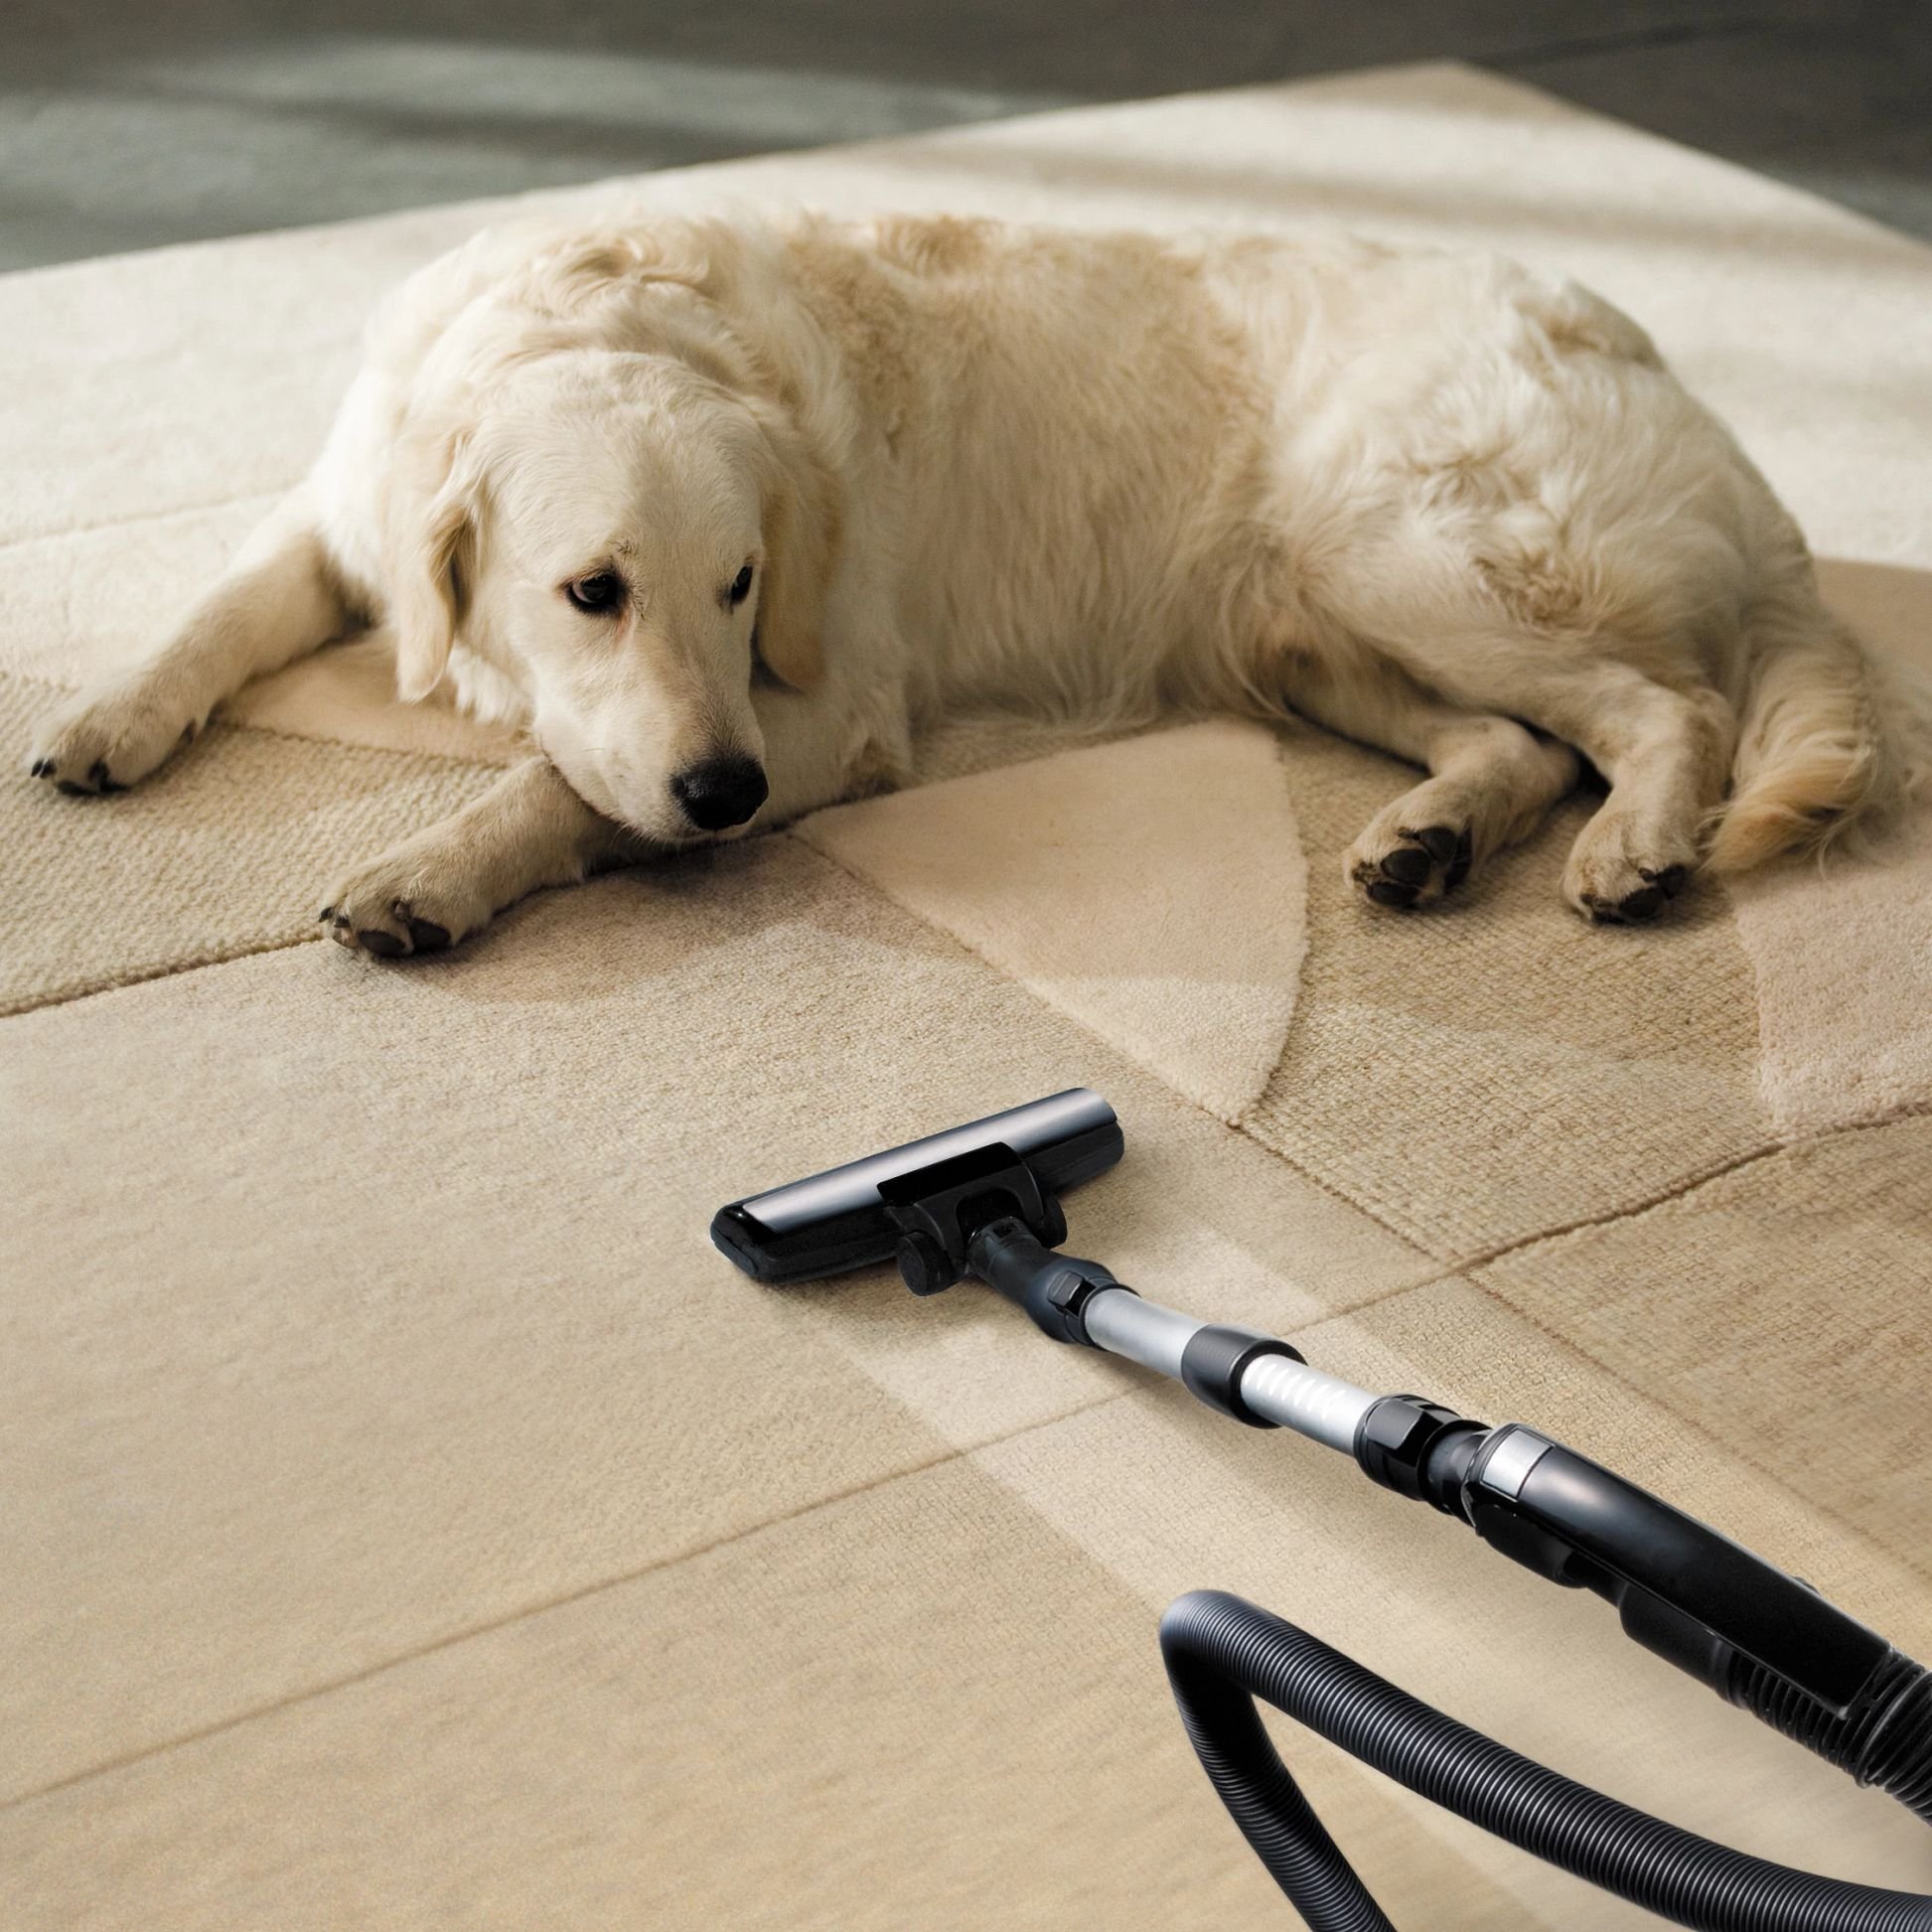 dog laying on area rug with vacuum next to it